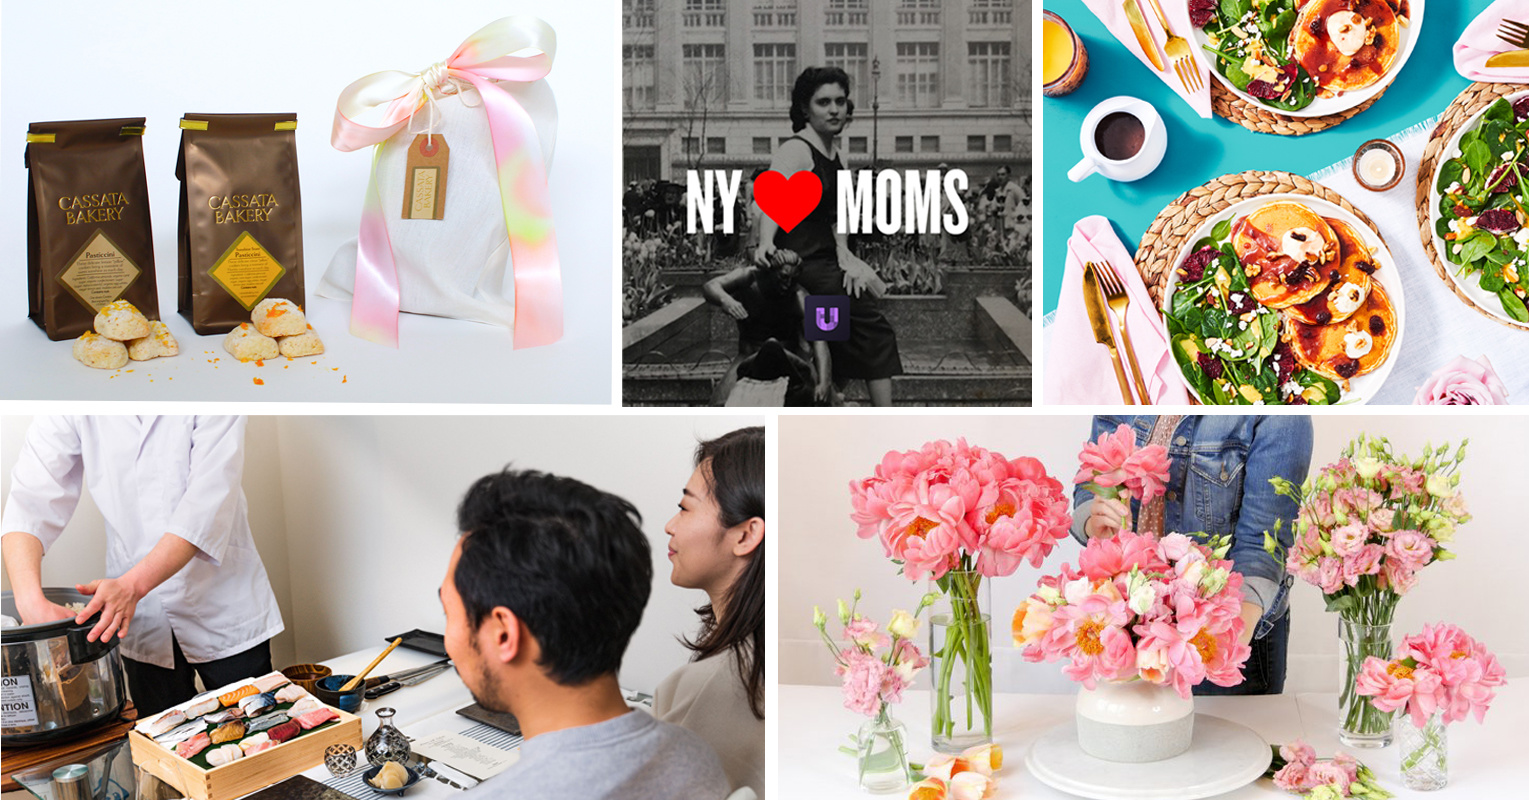 https://untappedcities.com/wp-content/uploads/2021/04/featured-mothers-day-gift-untapped-new-york0.jpg